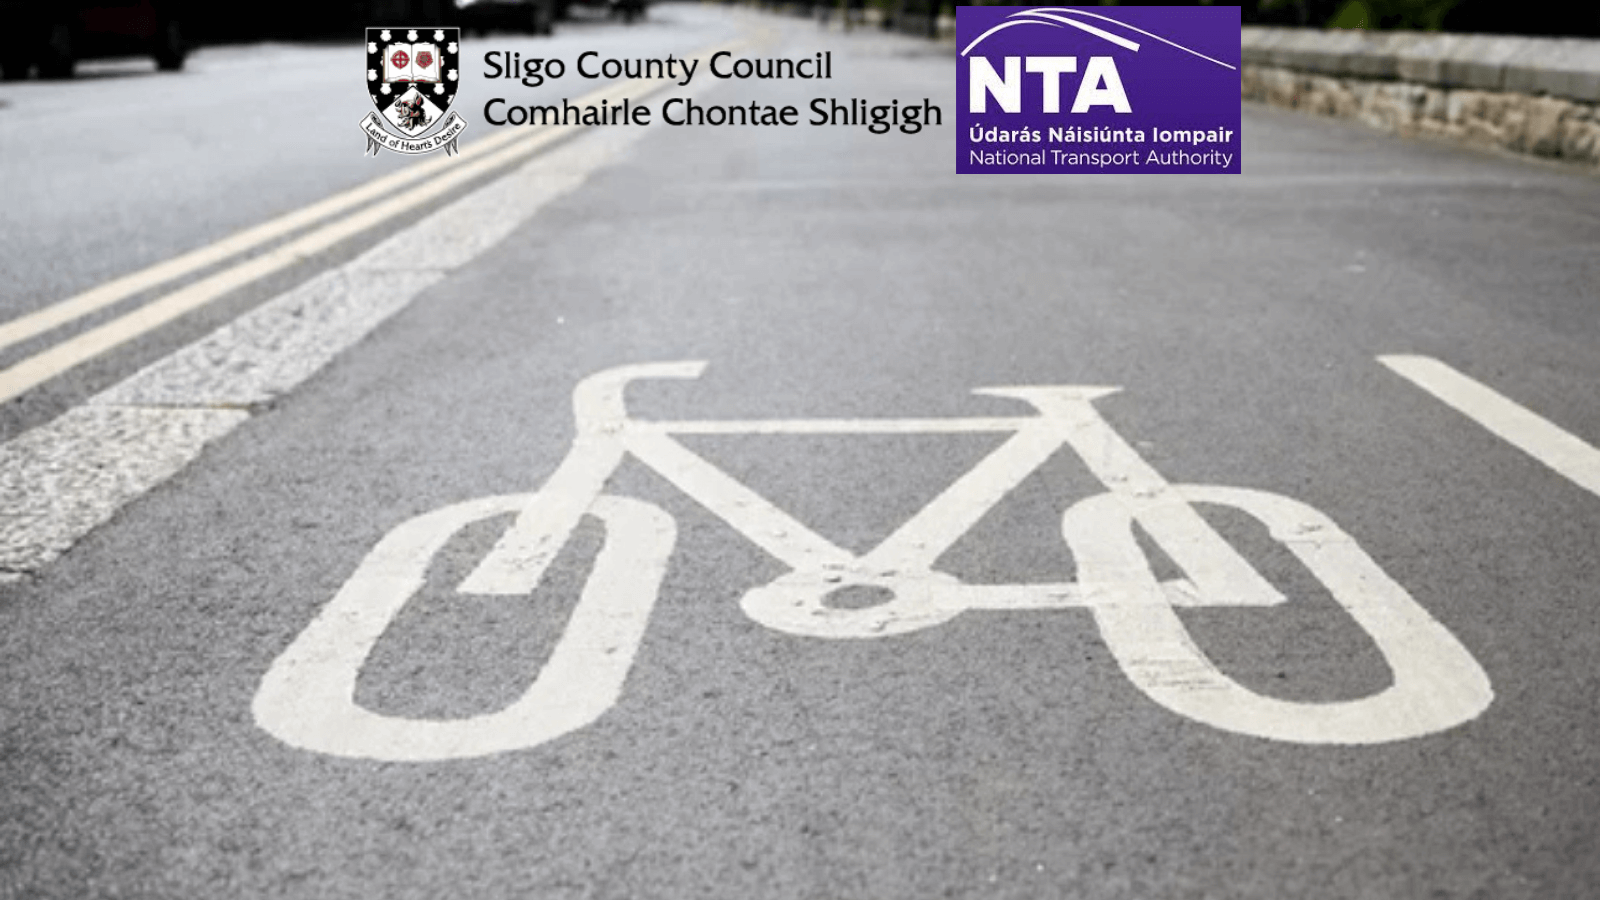 €2.6m funding for Sligo’s cycling and walking infrastructure